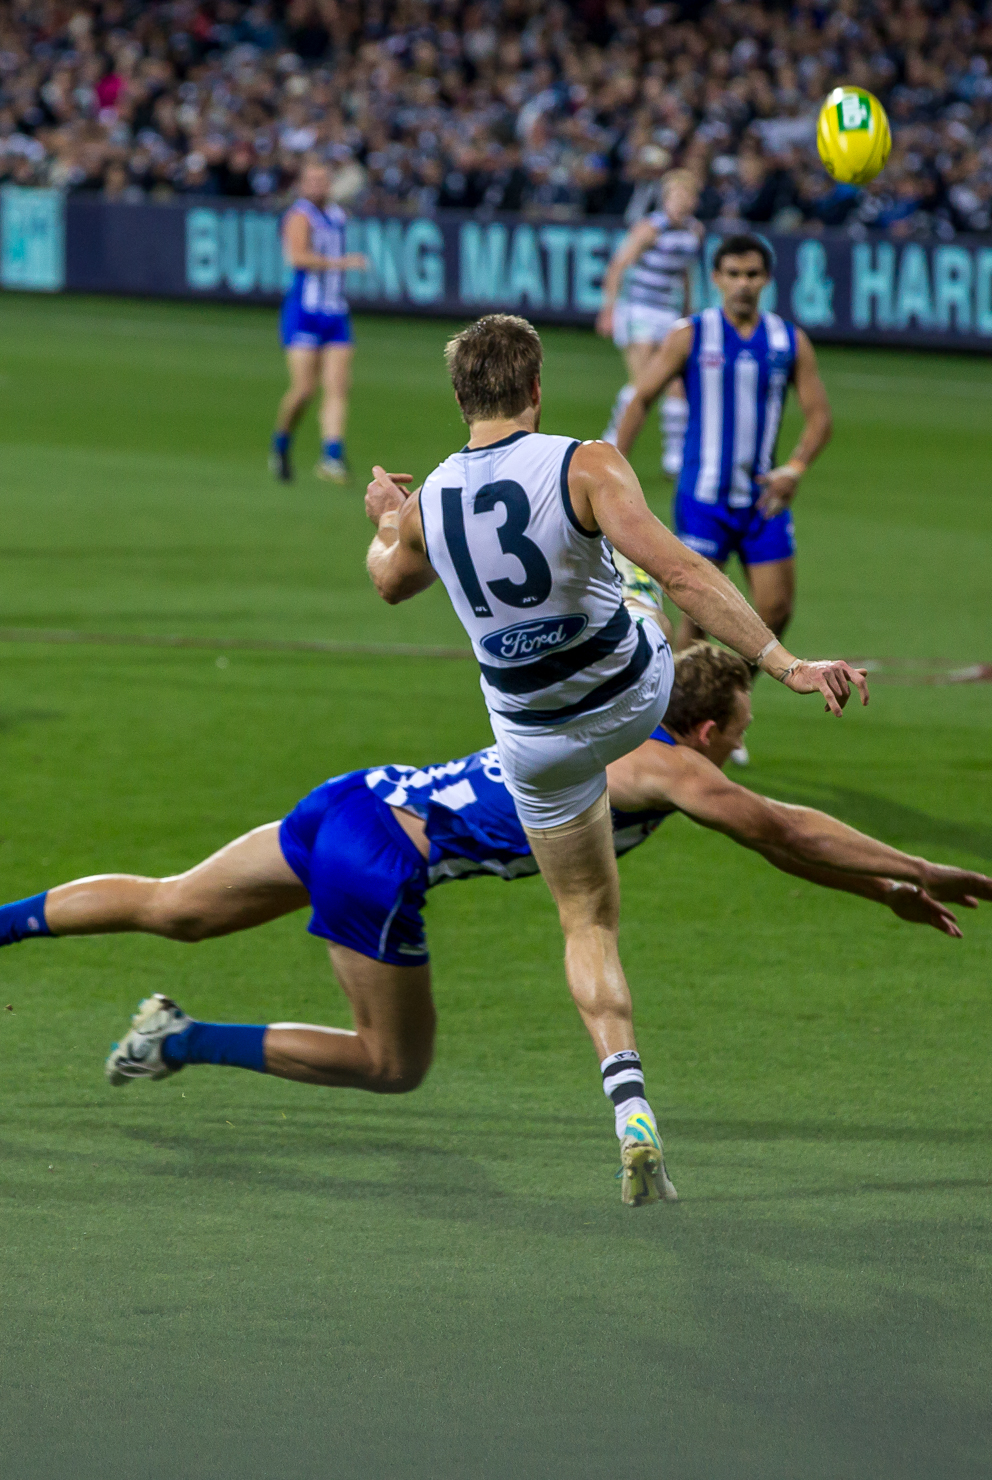 Friday 23rd May 2014 - Geelong defeat North Melbourne